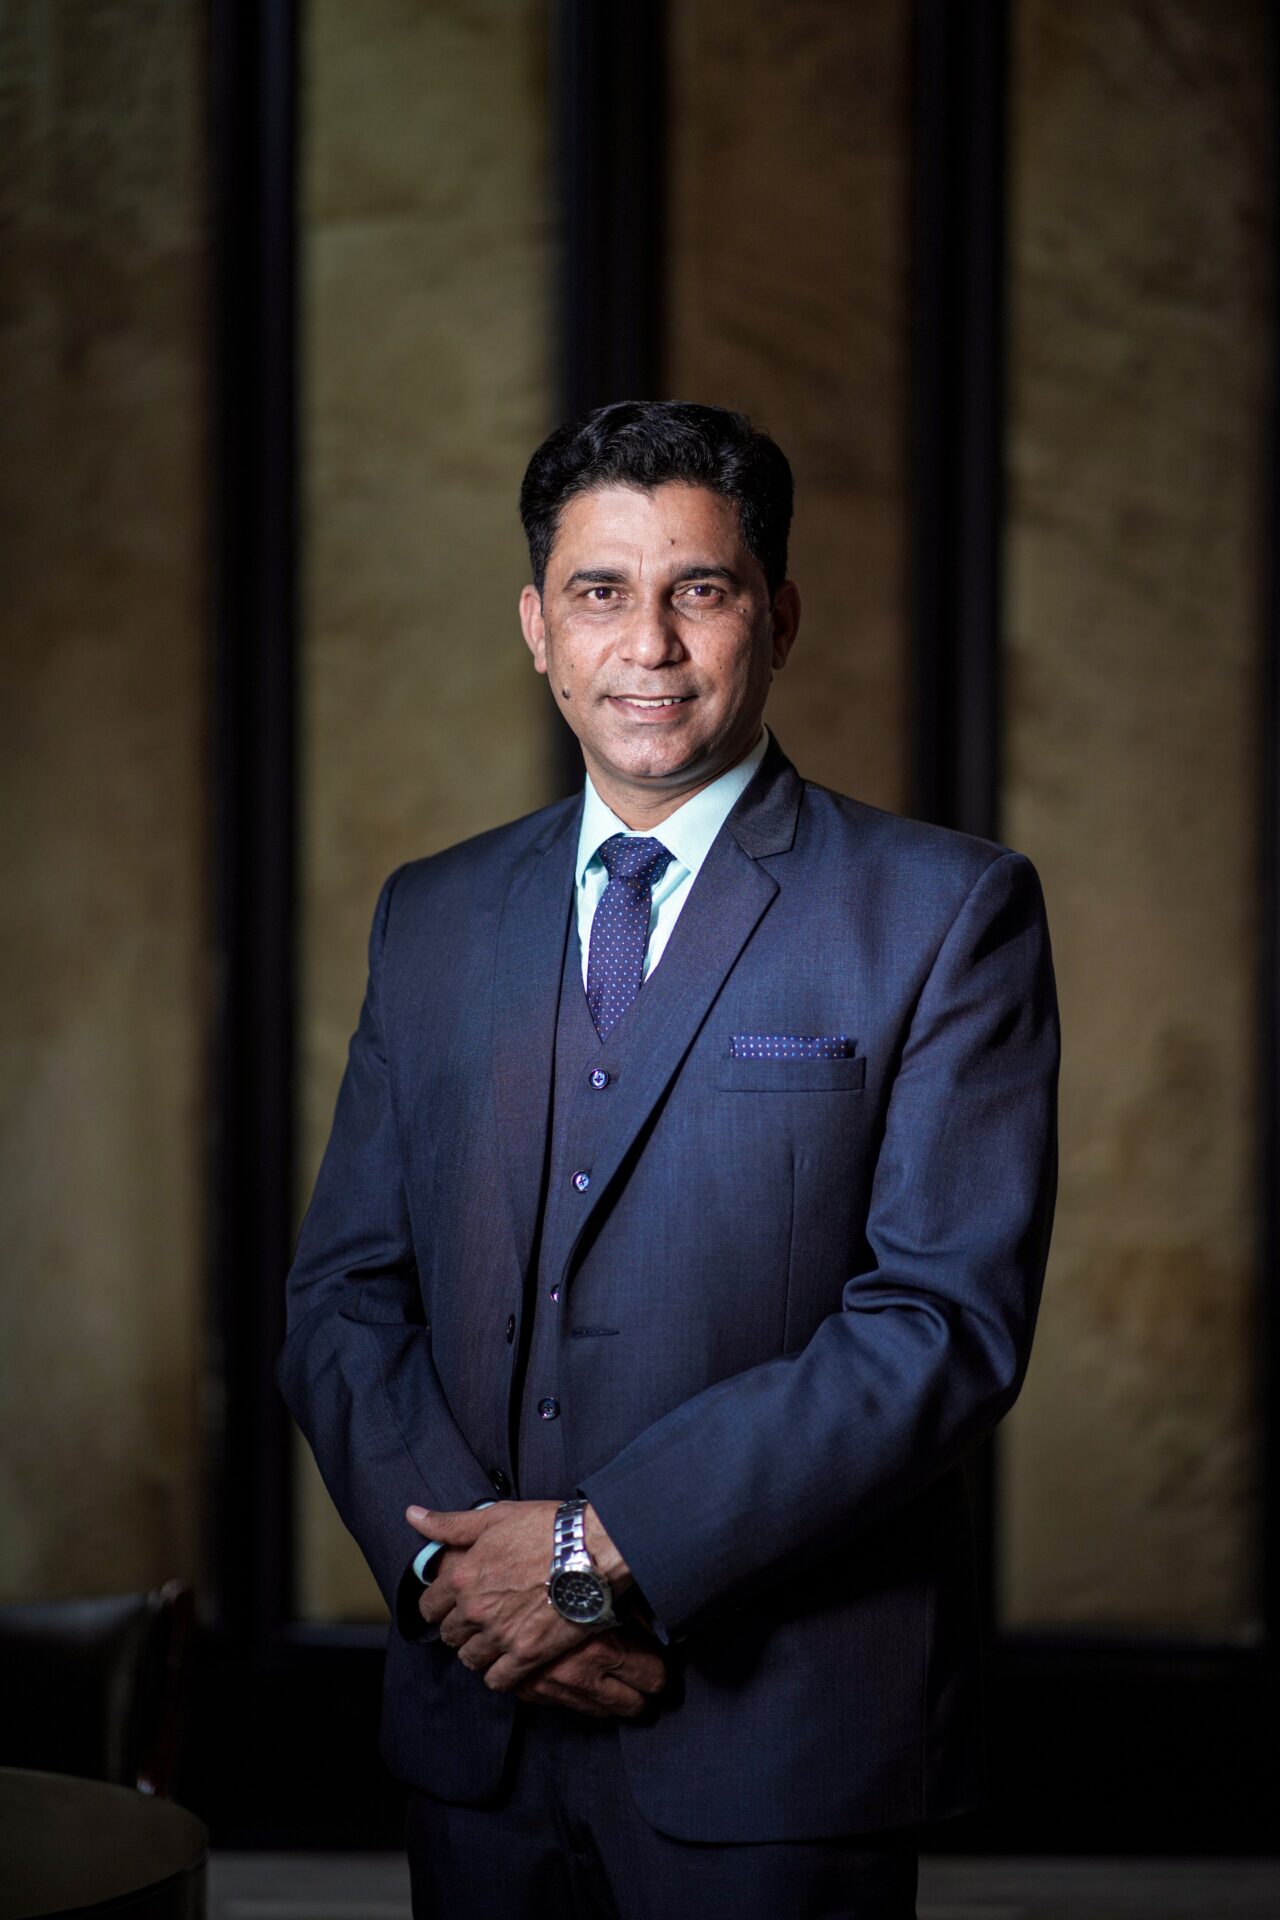 Renaissance Bengaluru Race Course Hotel appoints Stephen George as Director of Food and Beverage